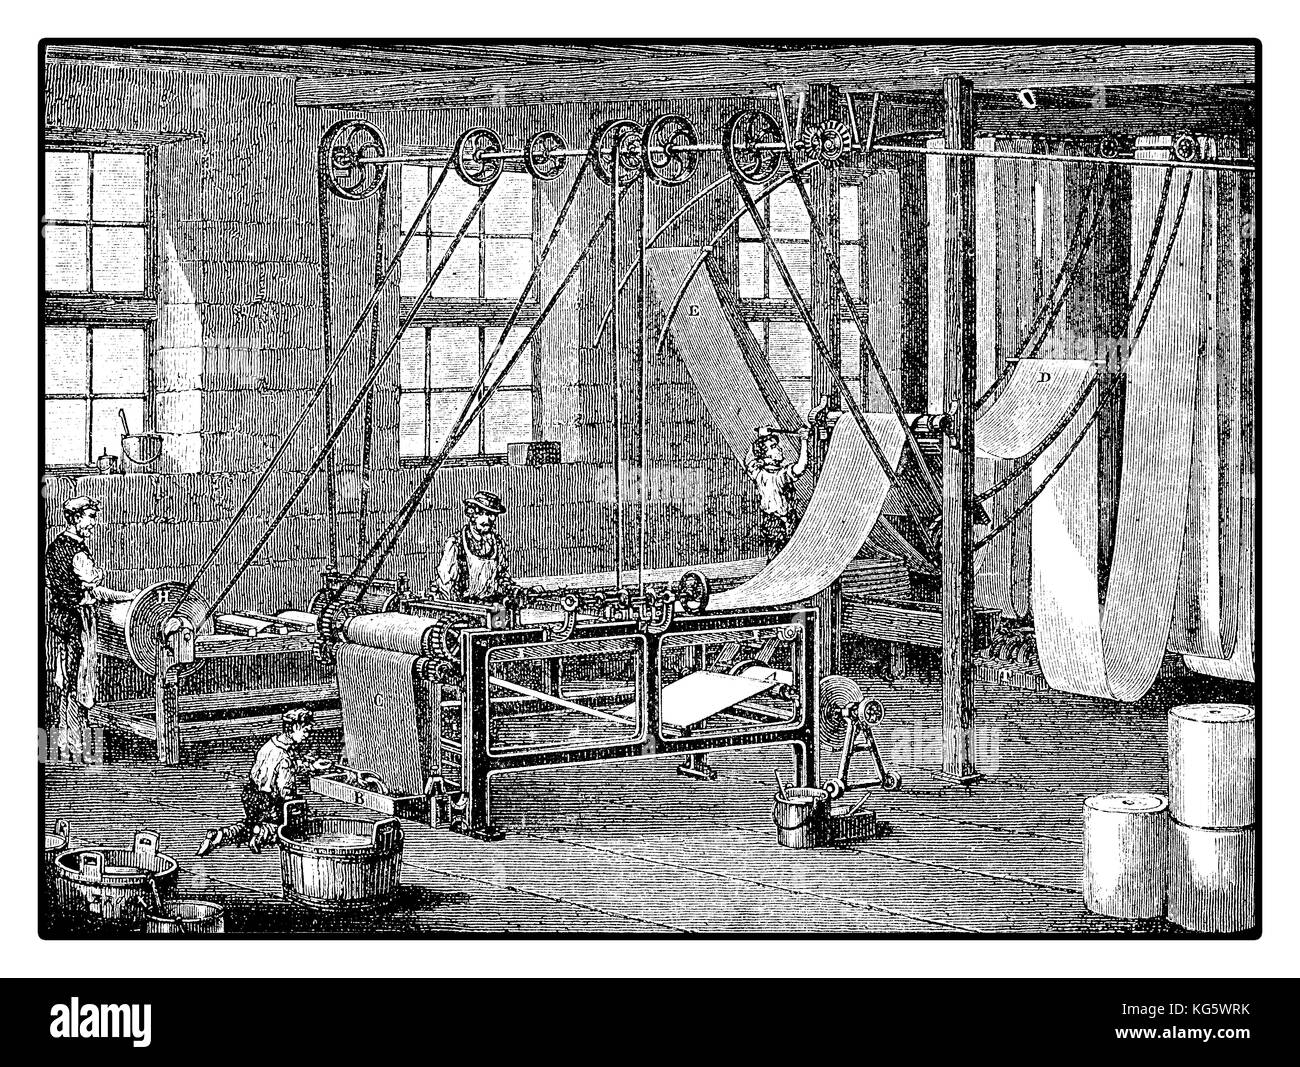 Textile finishing machine, with coating or dye, XIX century industrial factory Stock Photo